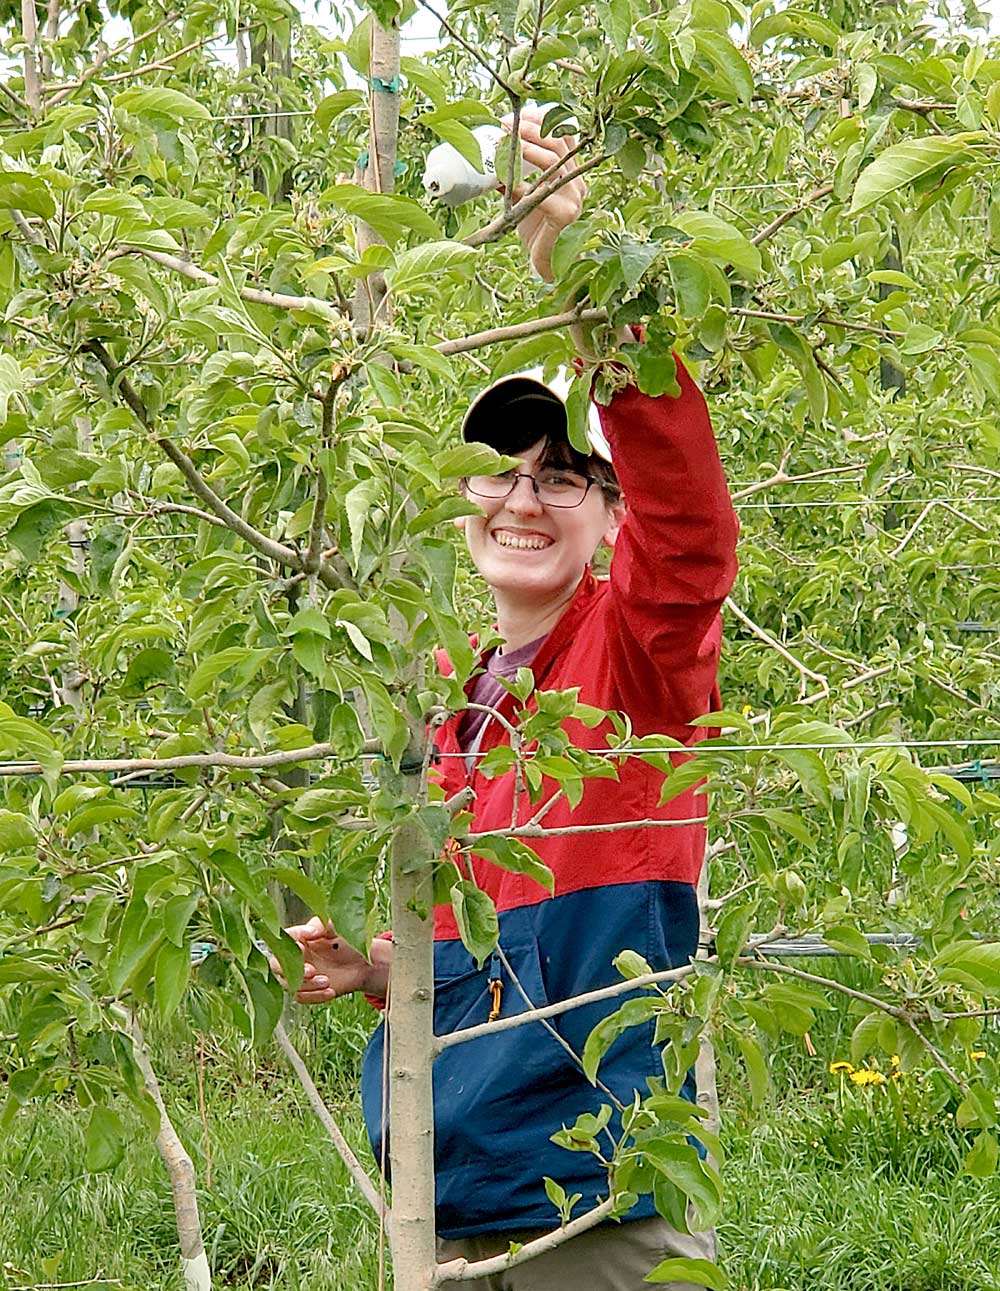 USDA technician Erica Moretti releases lacewings in May 2021 for aphid control in an apple orchard. (Courtesy Rebecca Schmidt-Jeffris/USDA-Agricultural Research Service)